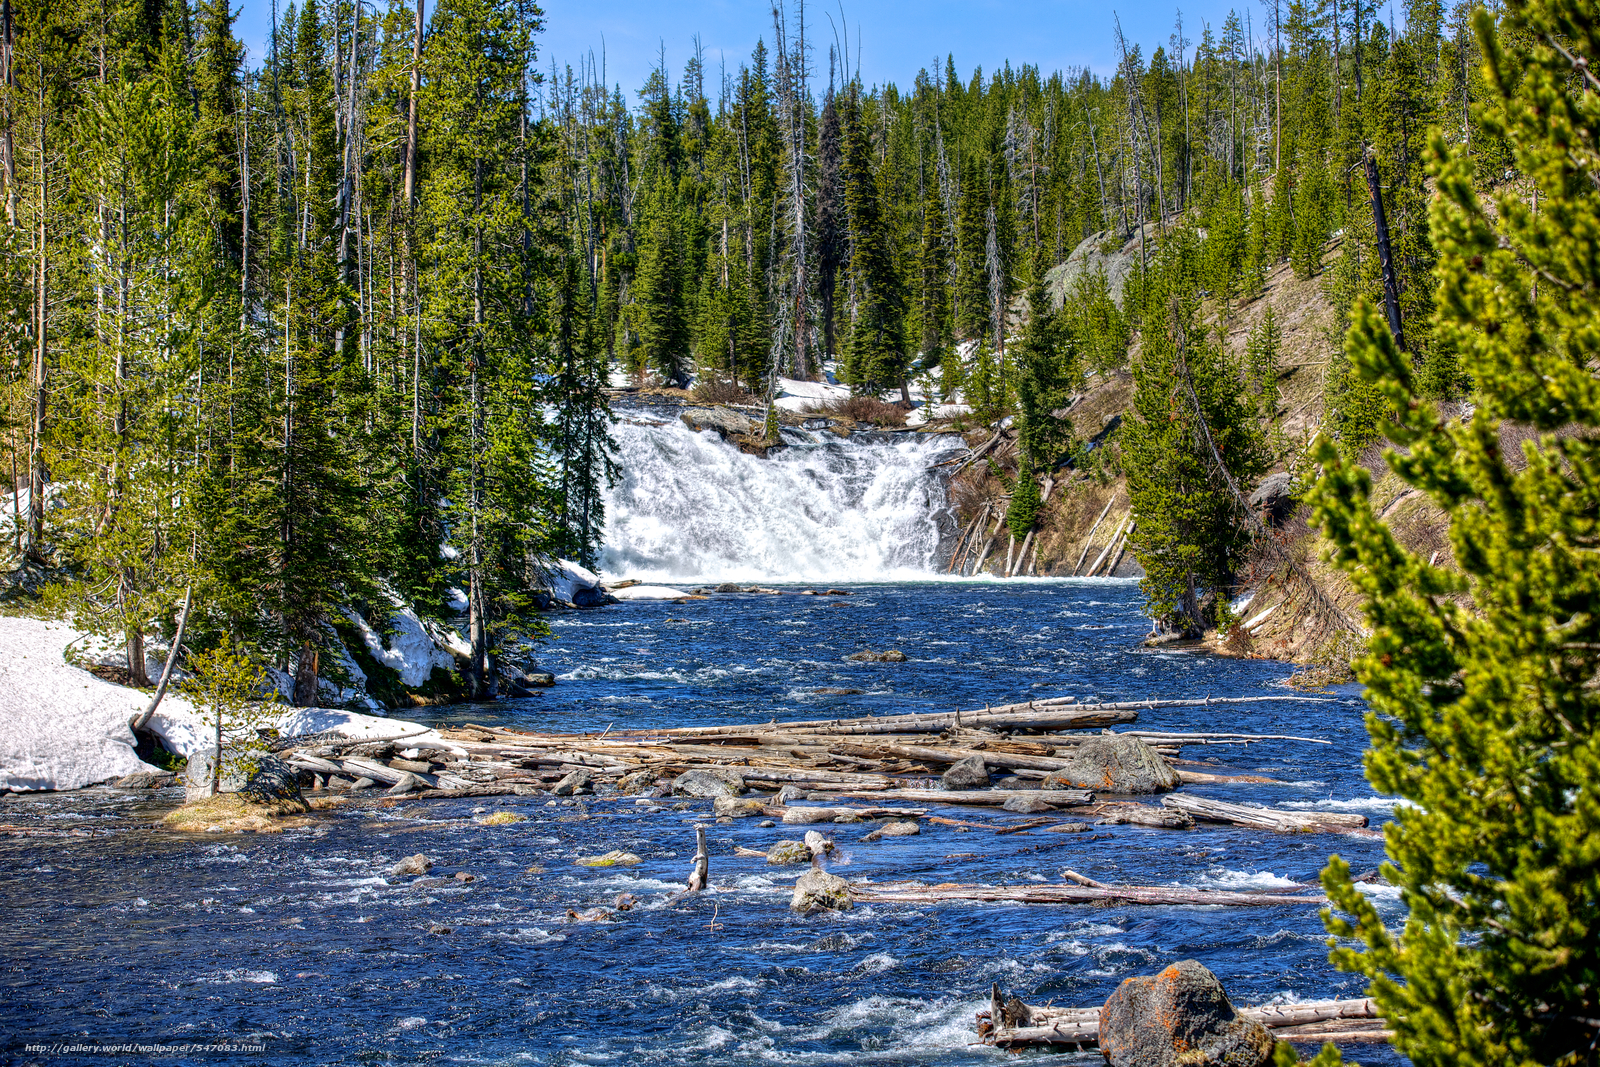 Download wallpaper Yellowstone National Park waterfall river trees